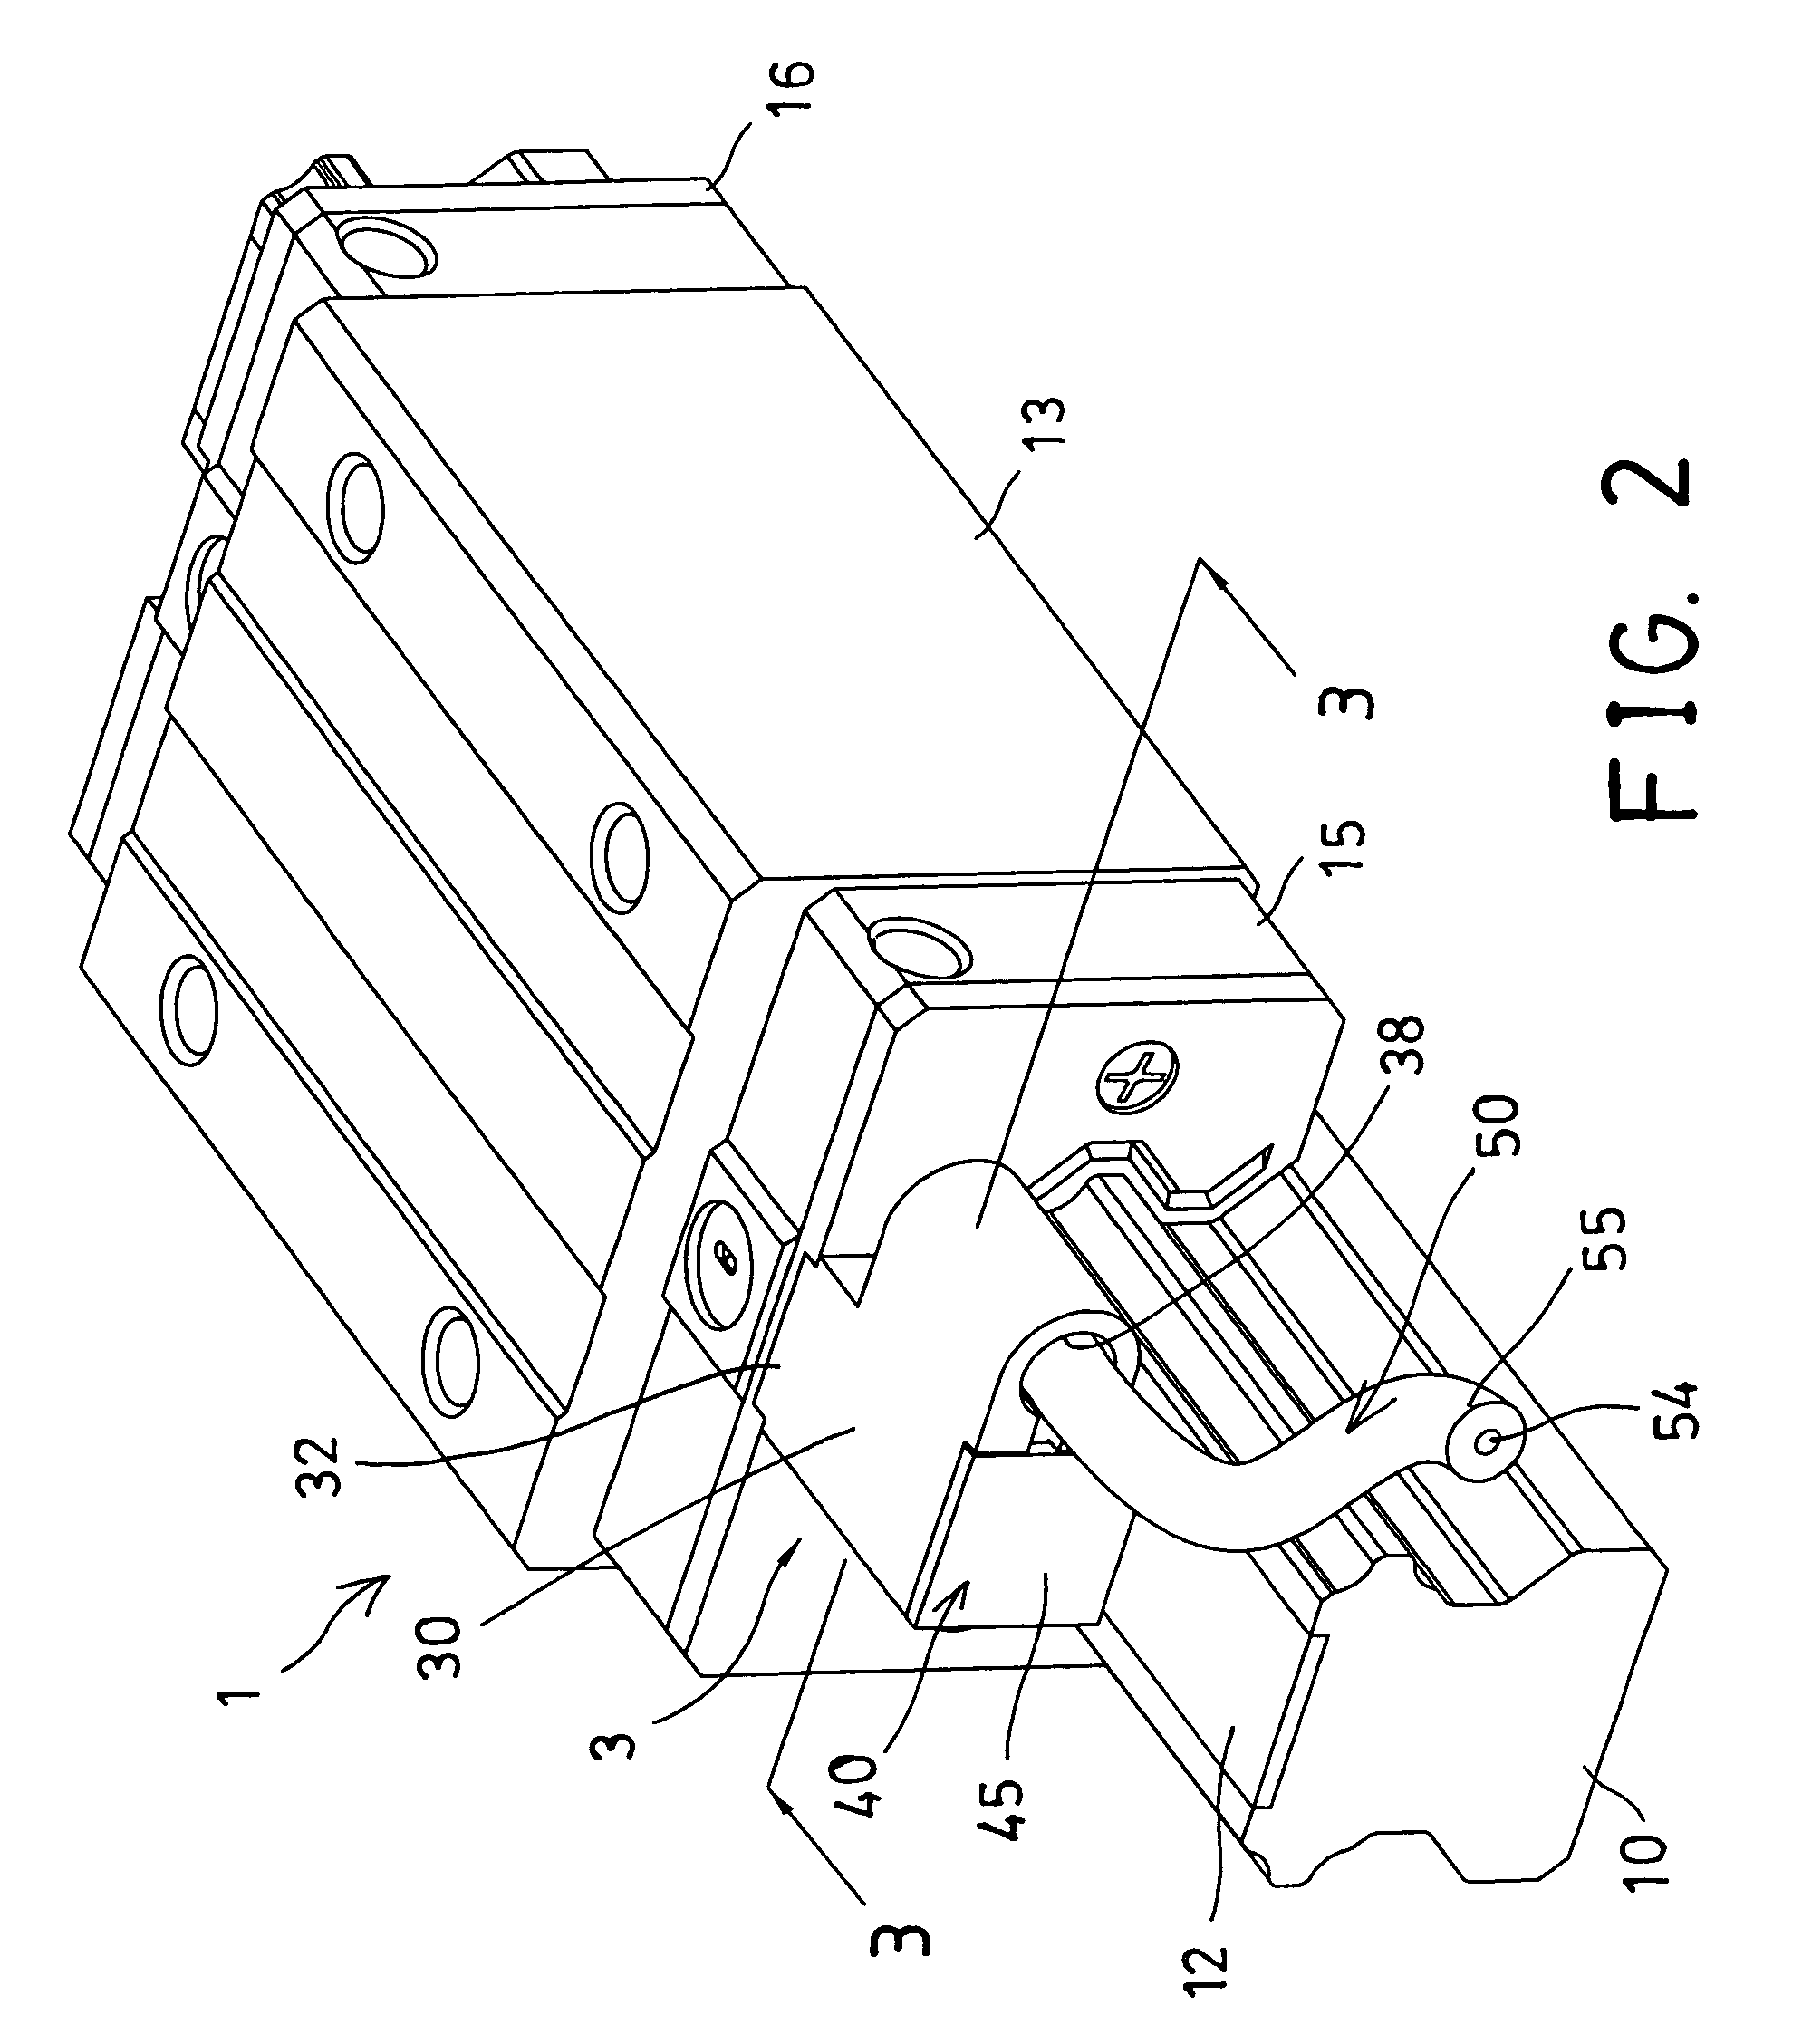 Linear motion guide apparatus having detecting device